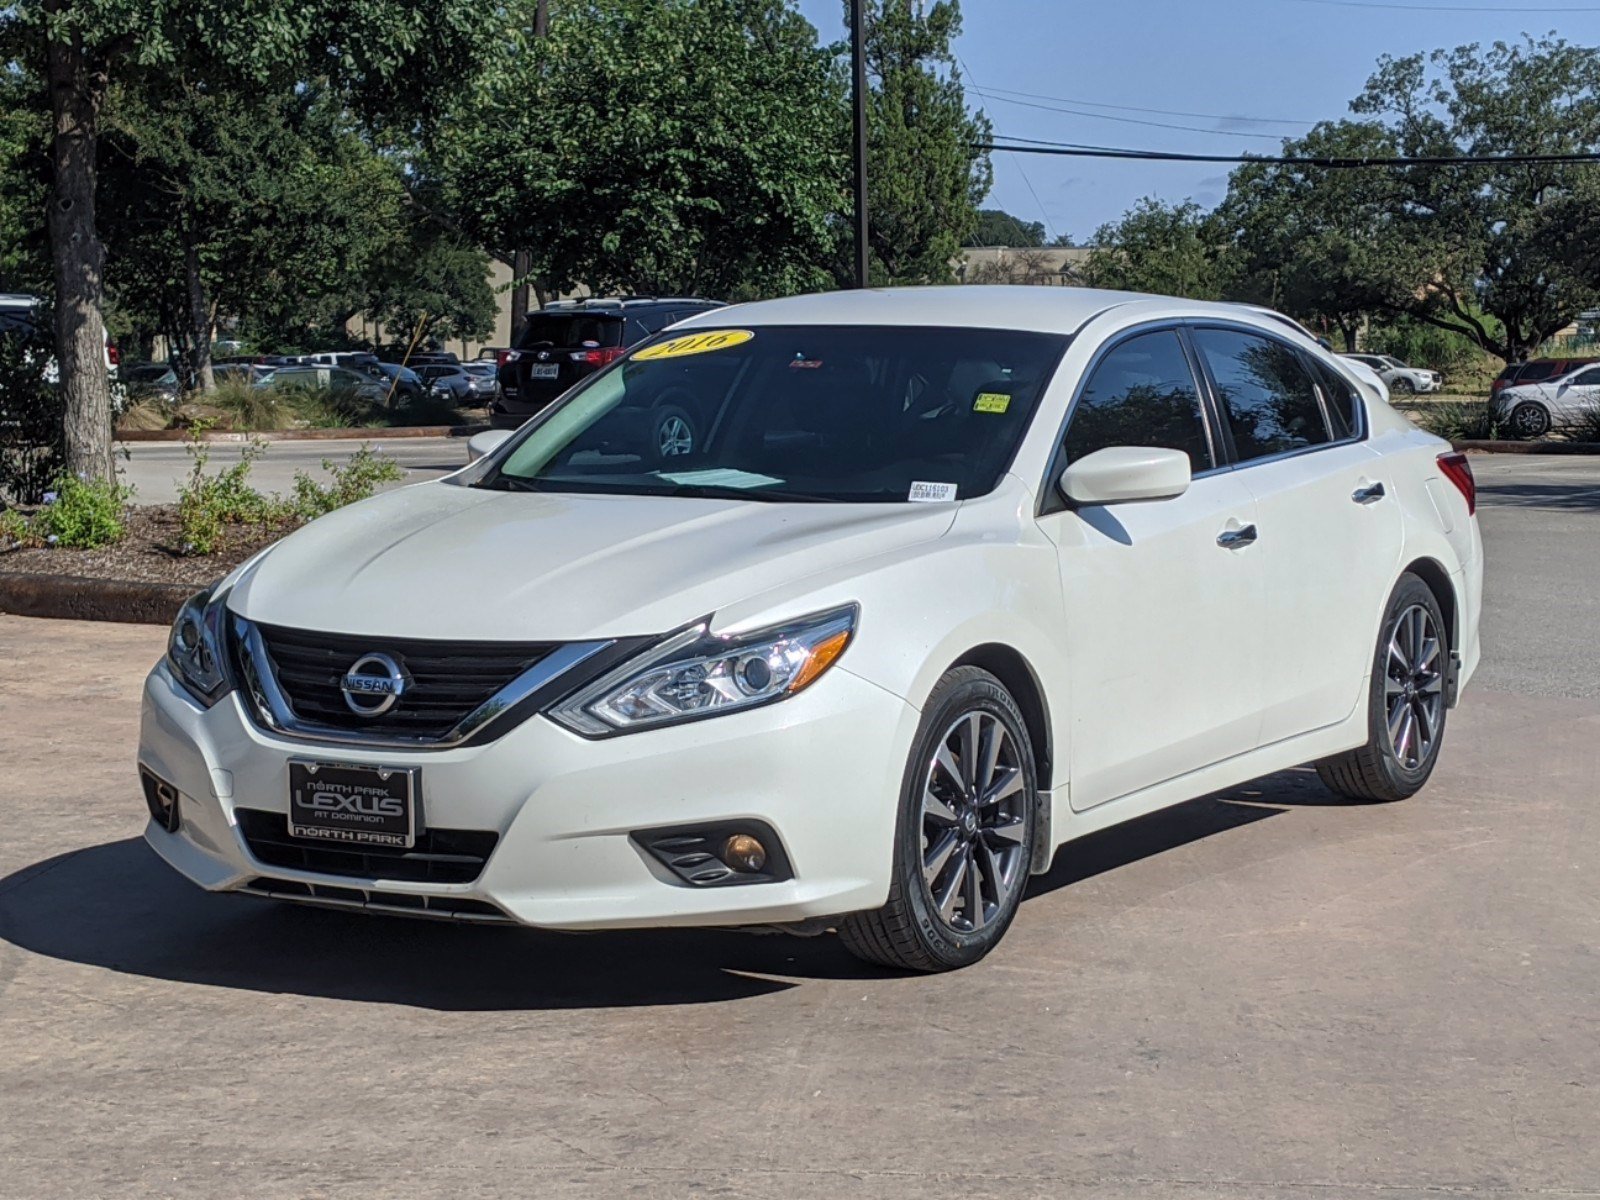 PreOwned 2016 Nissan Altima 2.5 SV